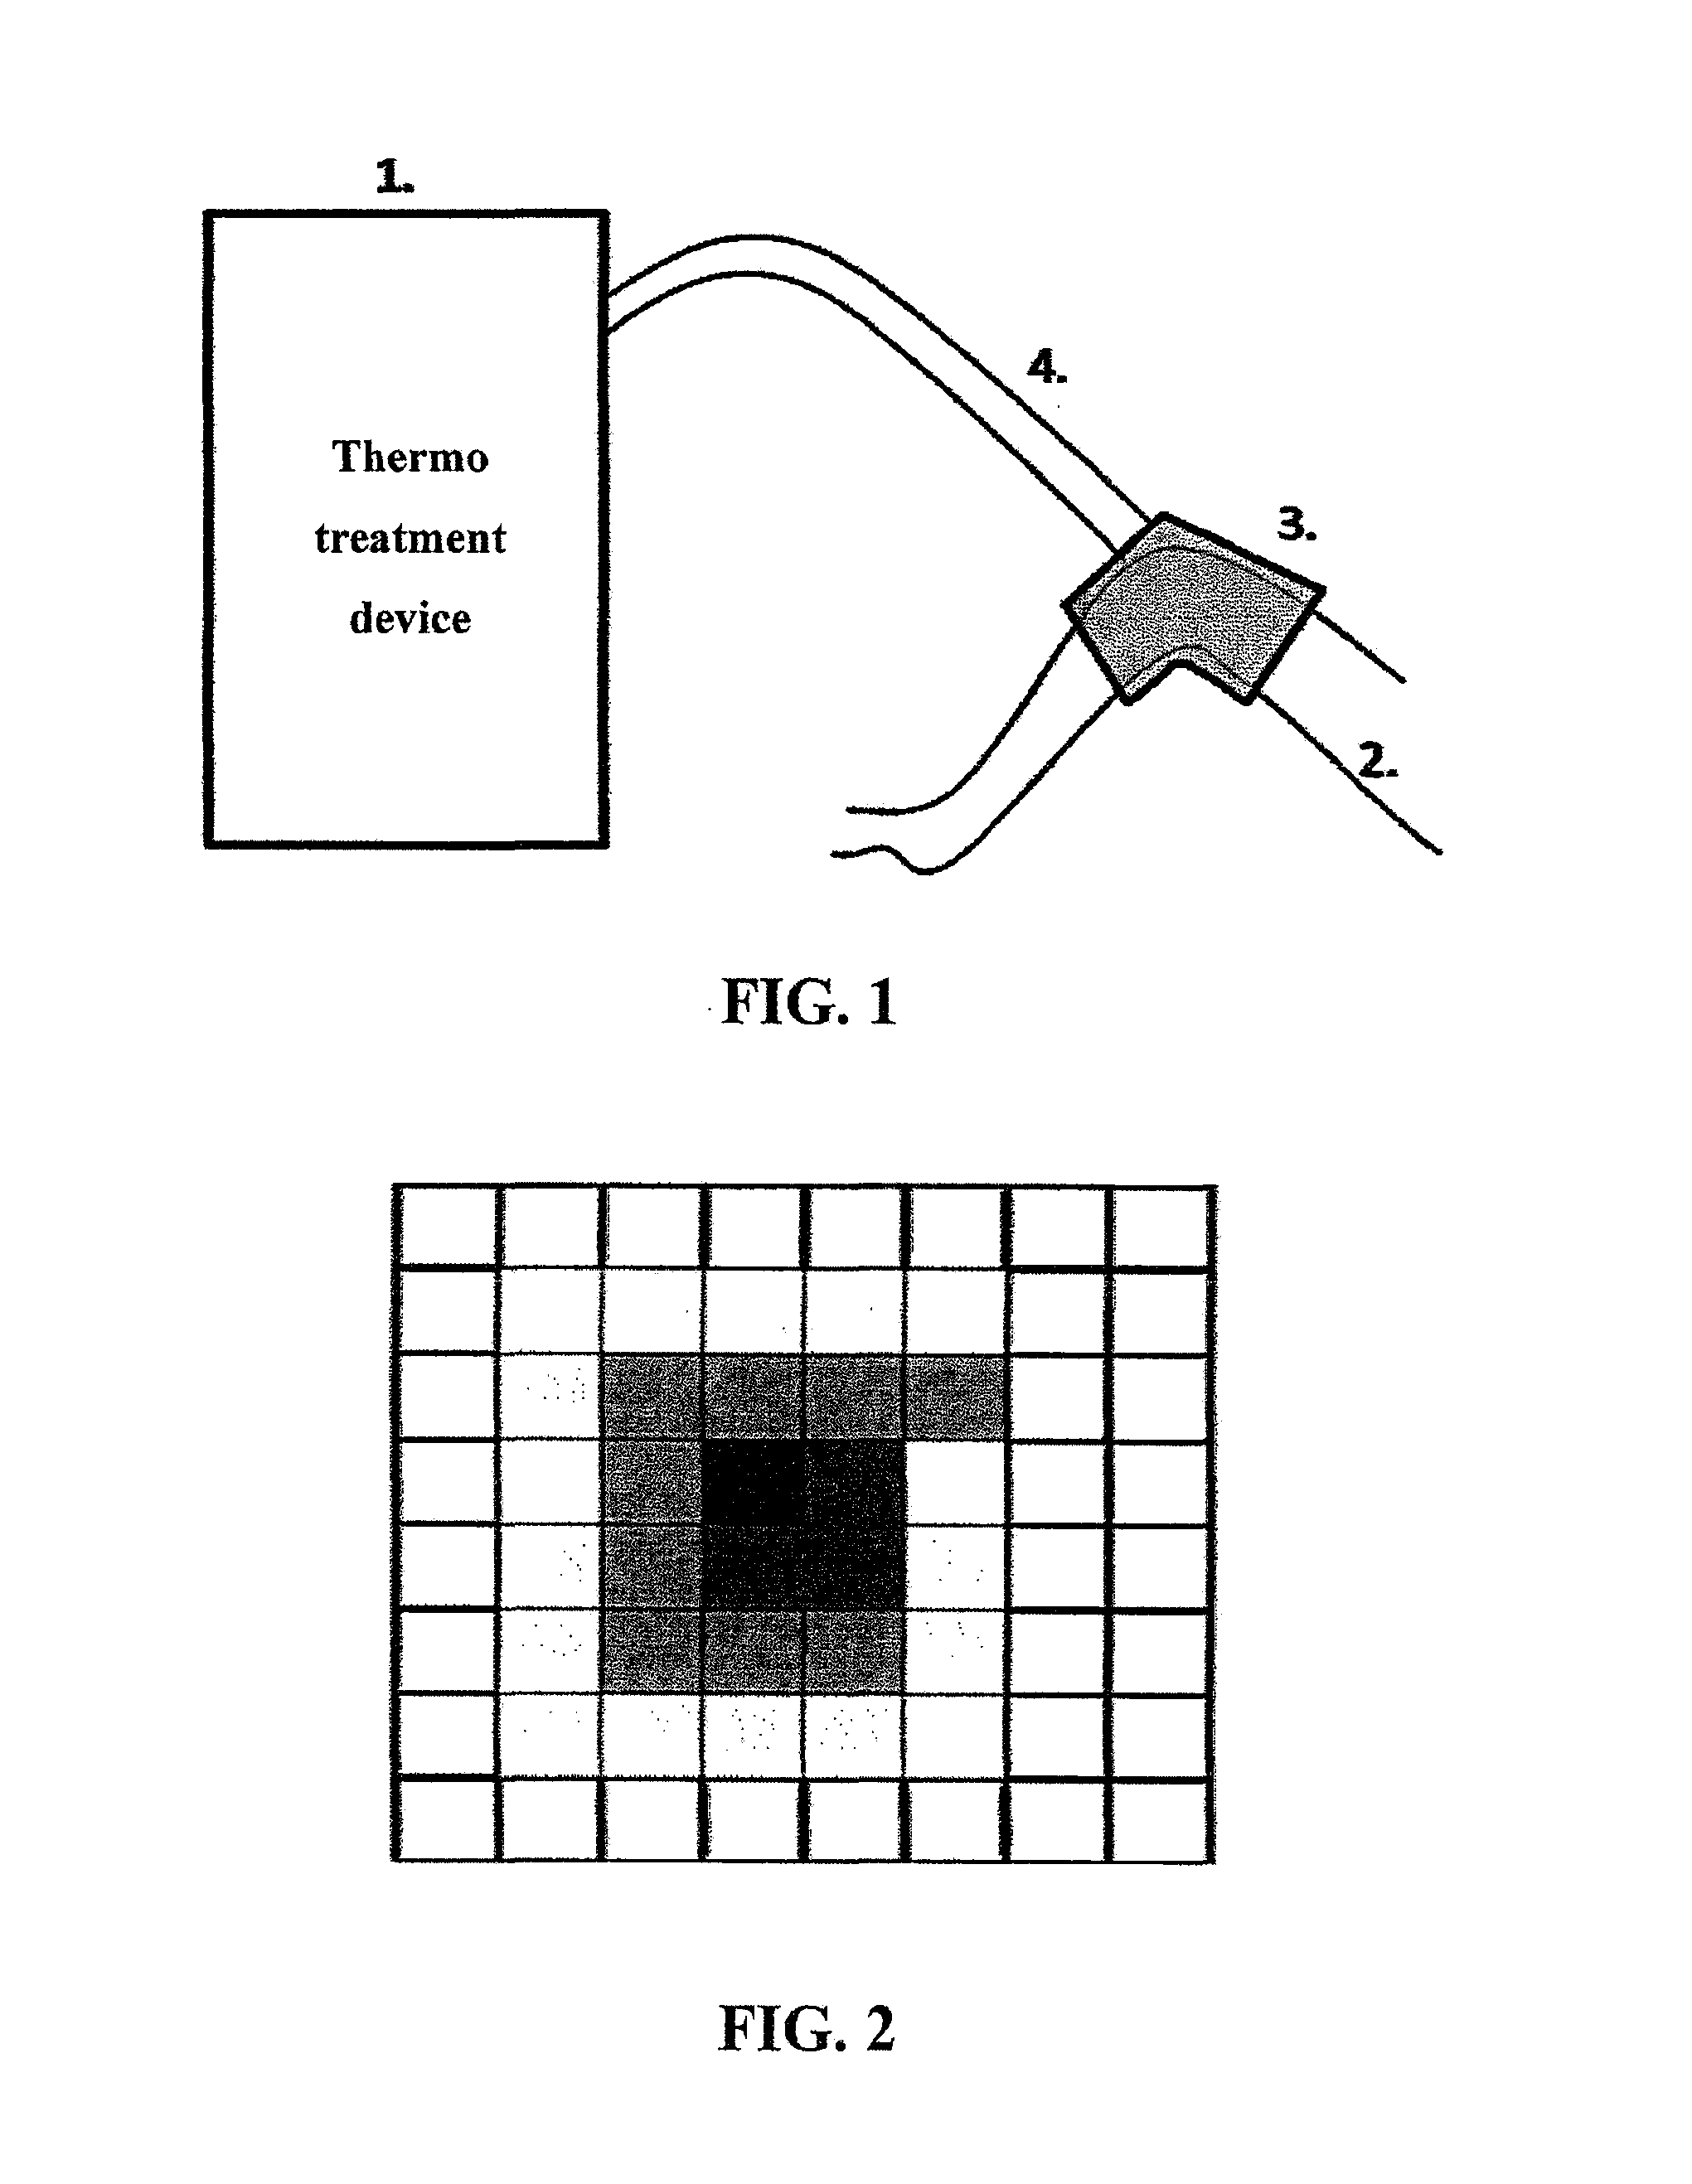 System for detection and treatment of infection or inflamation